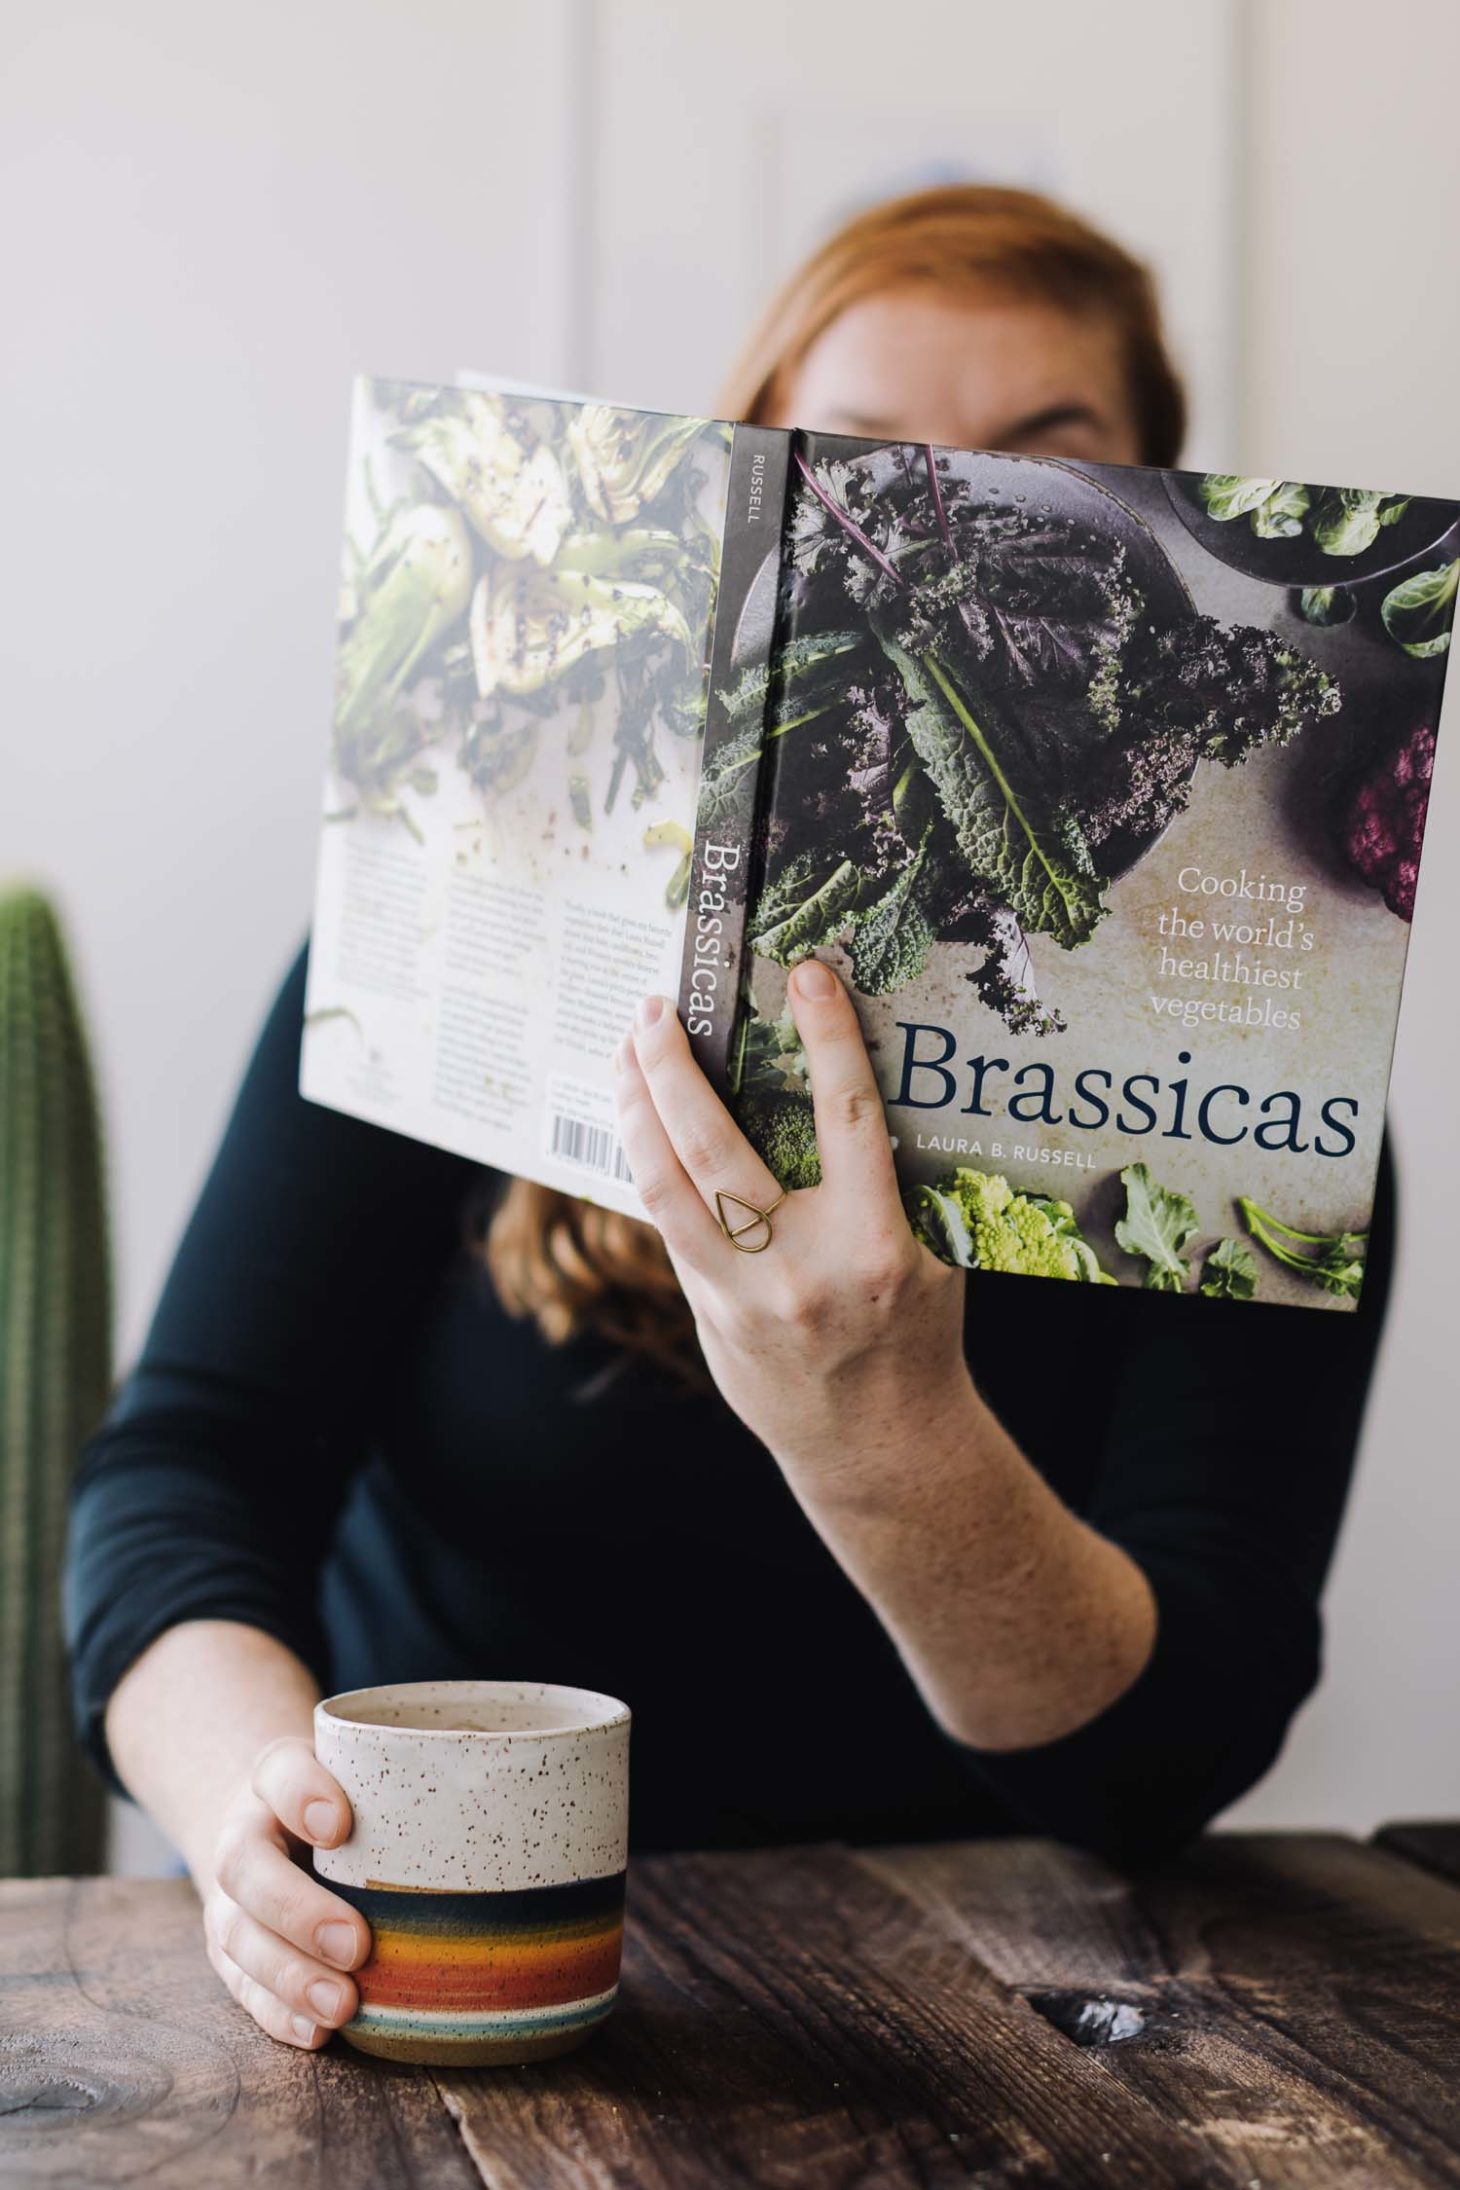 Brassicas: Cooking the World's Healthiest Vegetables: Kale, Cauliflower, Broccoli, Brussels Sprouts and More by Laura B. Russell